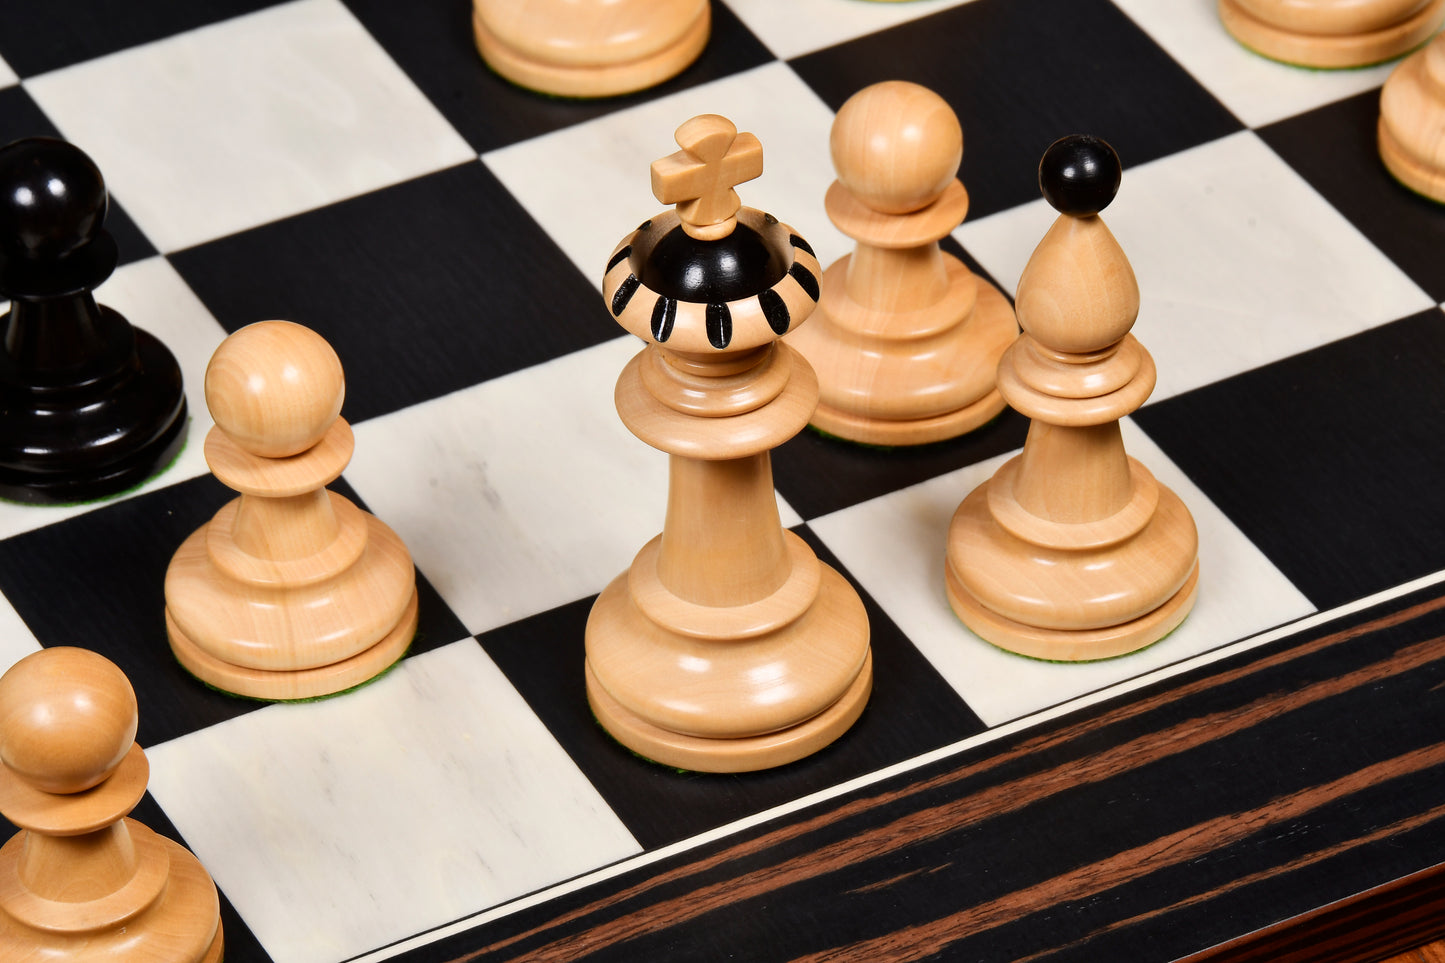 The 1935 Warsaw Capablanca Simultaneous Chess Set Reproduction in Ebony and Boxwood - 3.8" King